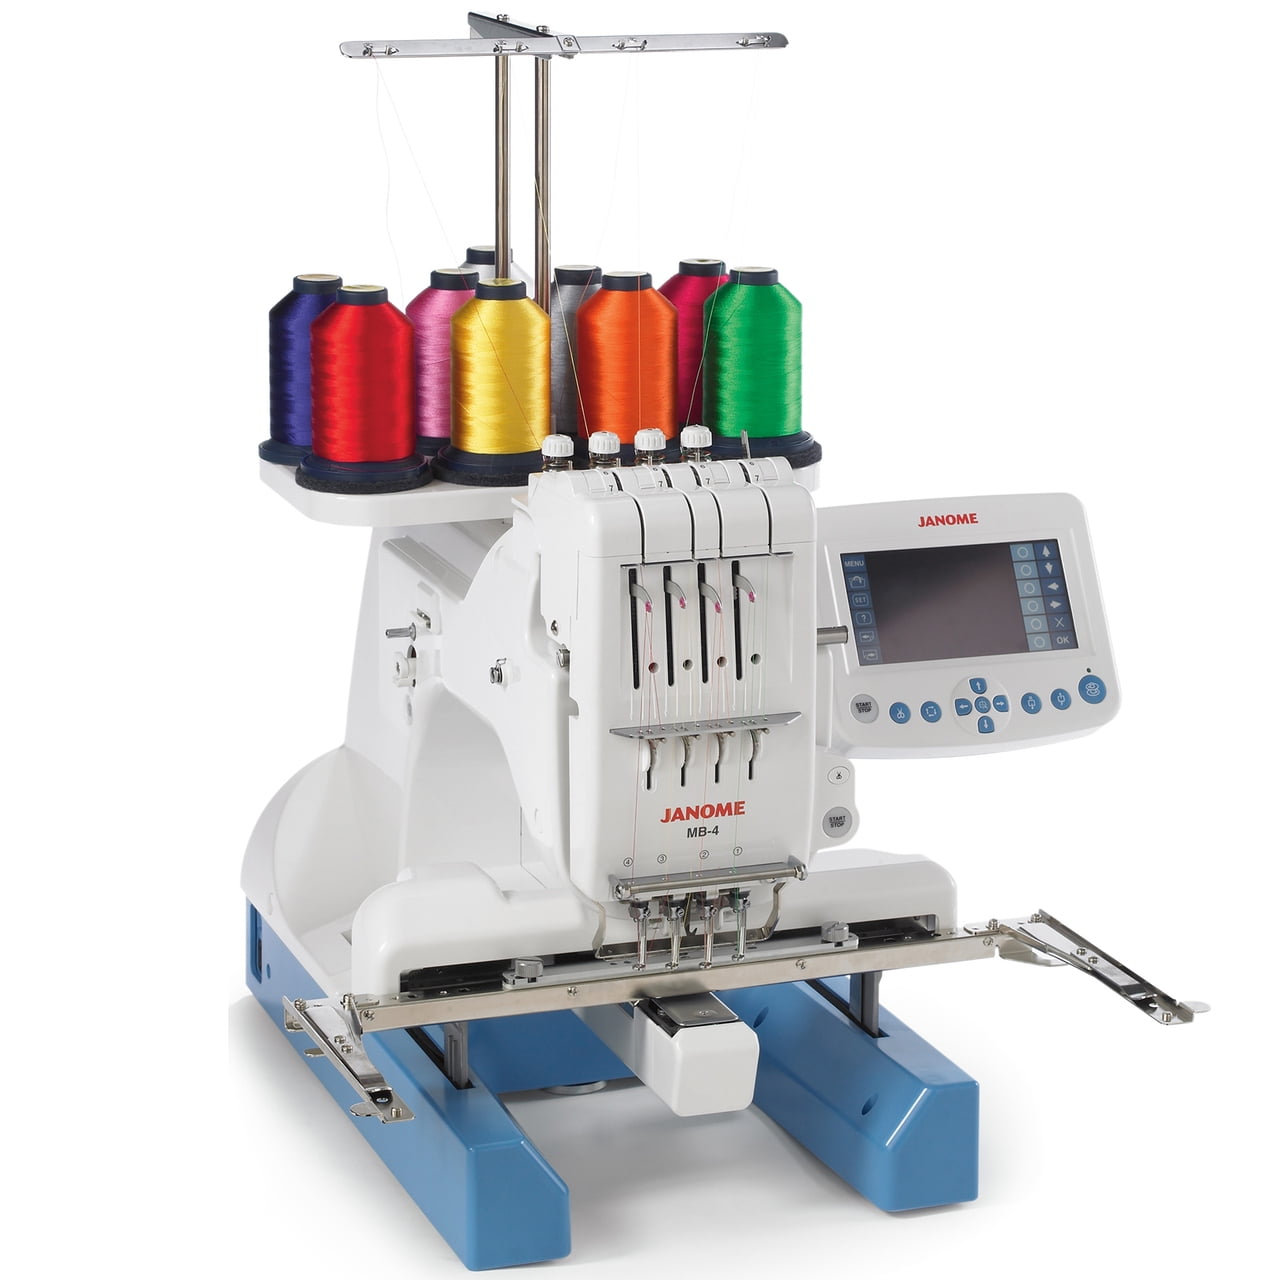 Best Janome Embroidery Needle